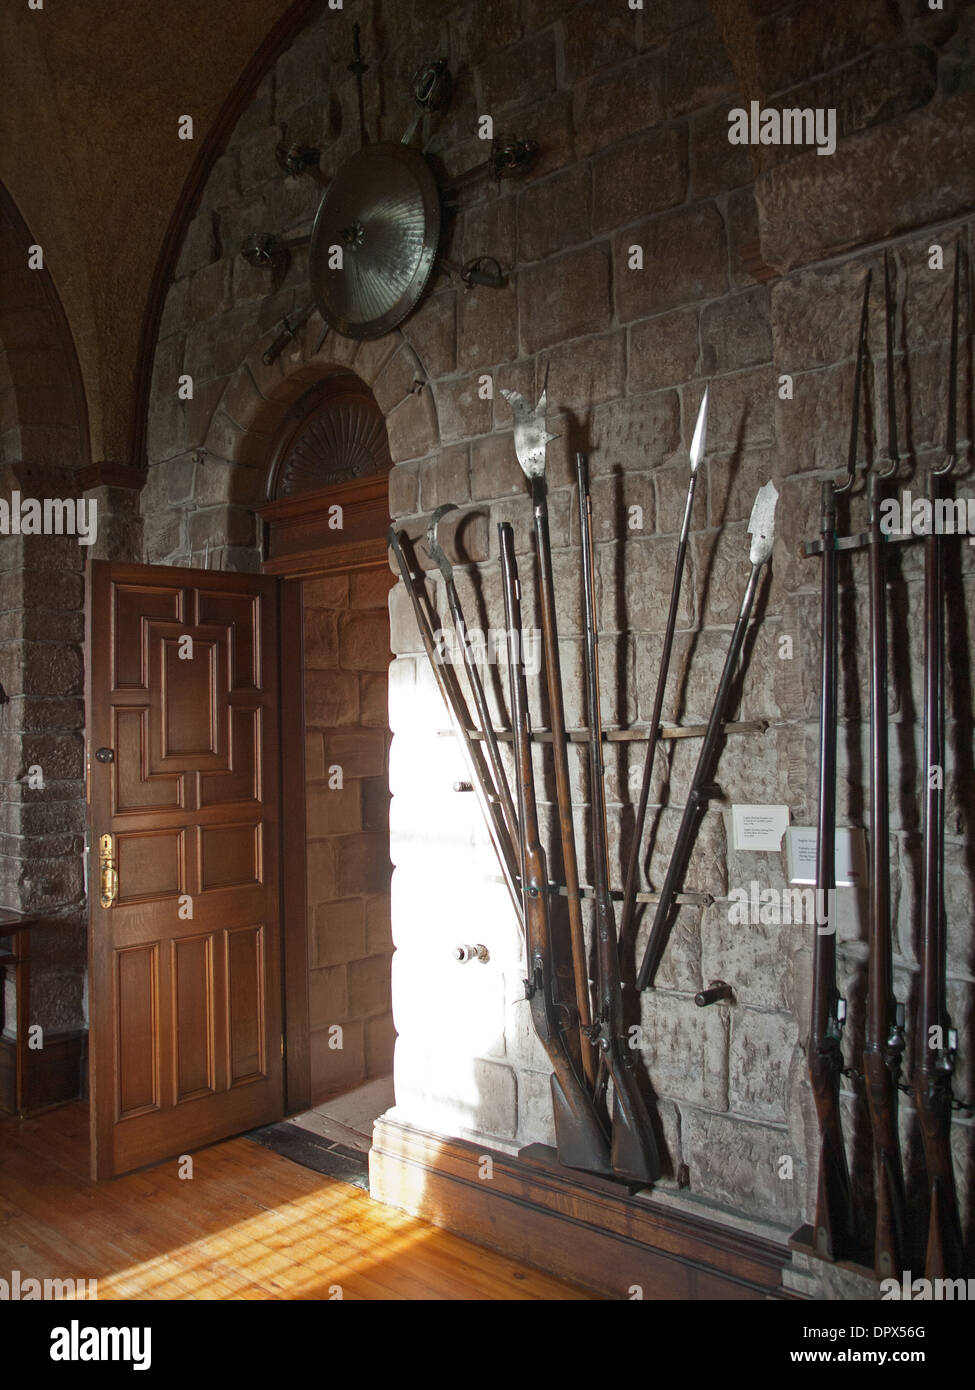 Musket rifles on display in the Armoury Bamburgh Castle Northumberland England UK Stock Photo